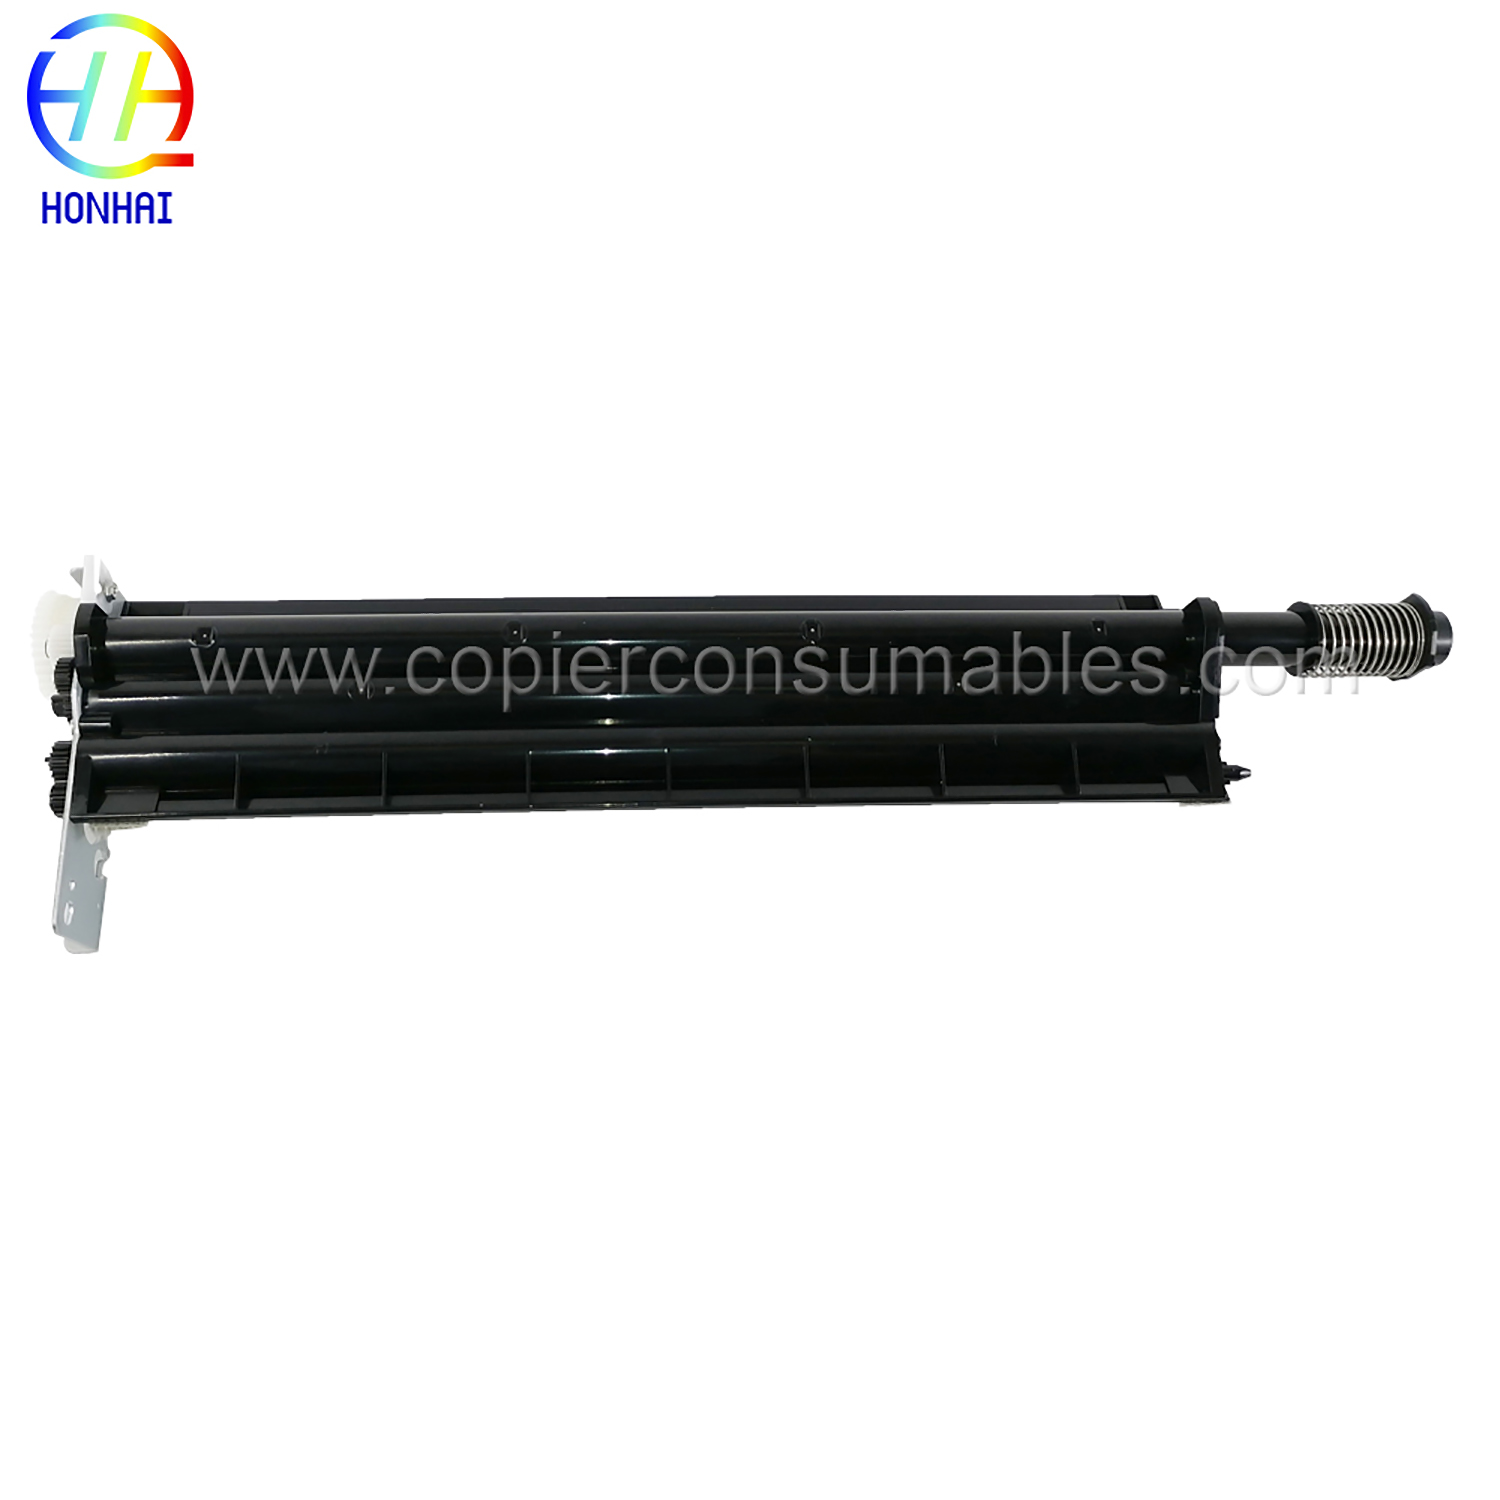 IBT Cleaner Assembly for Xerox 042K94561  DC240, DC242, DC250, DC252, DC260 (2) 拷贝